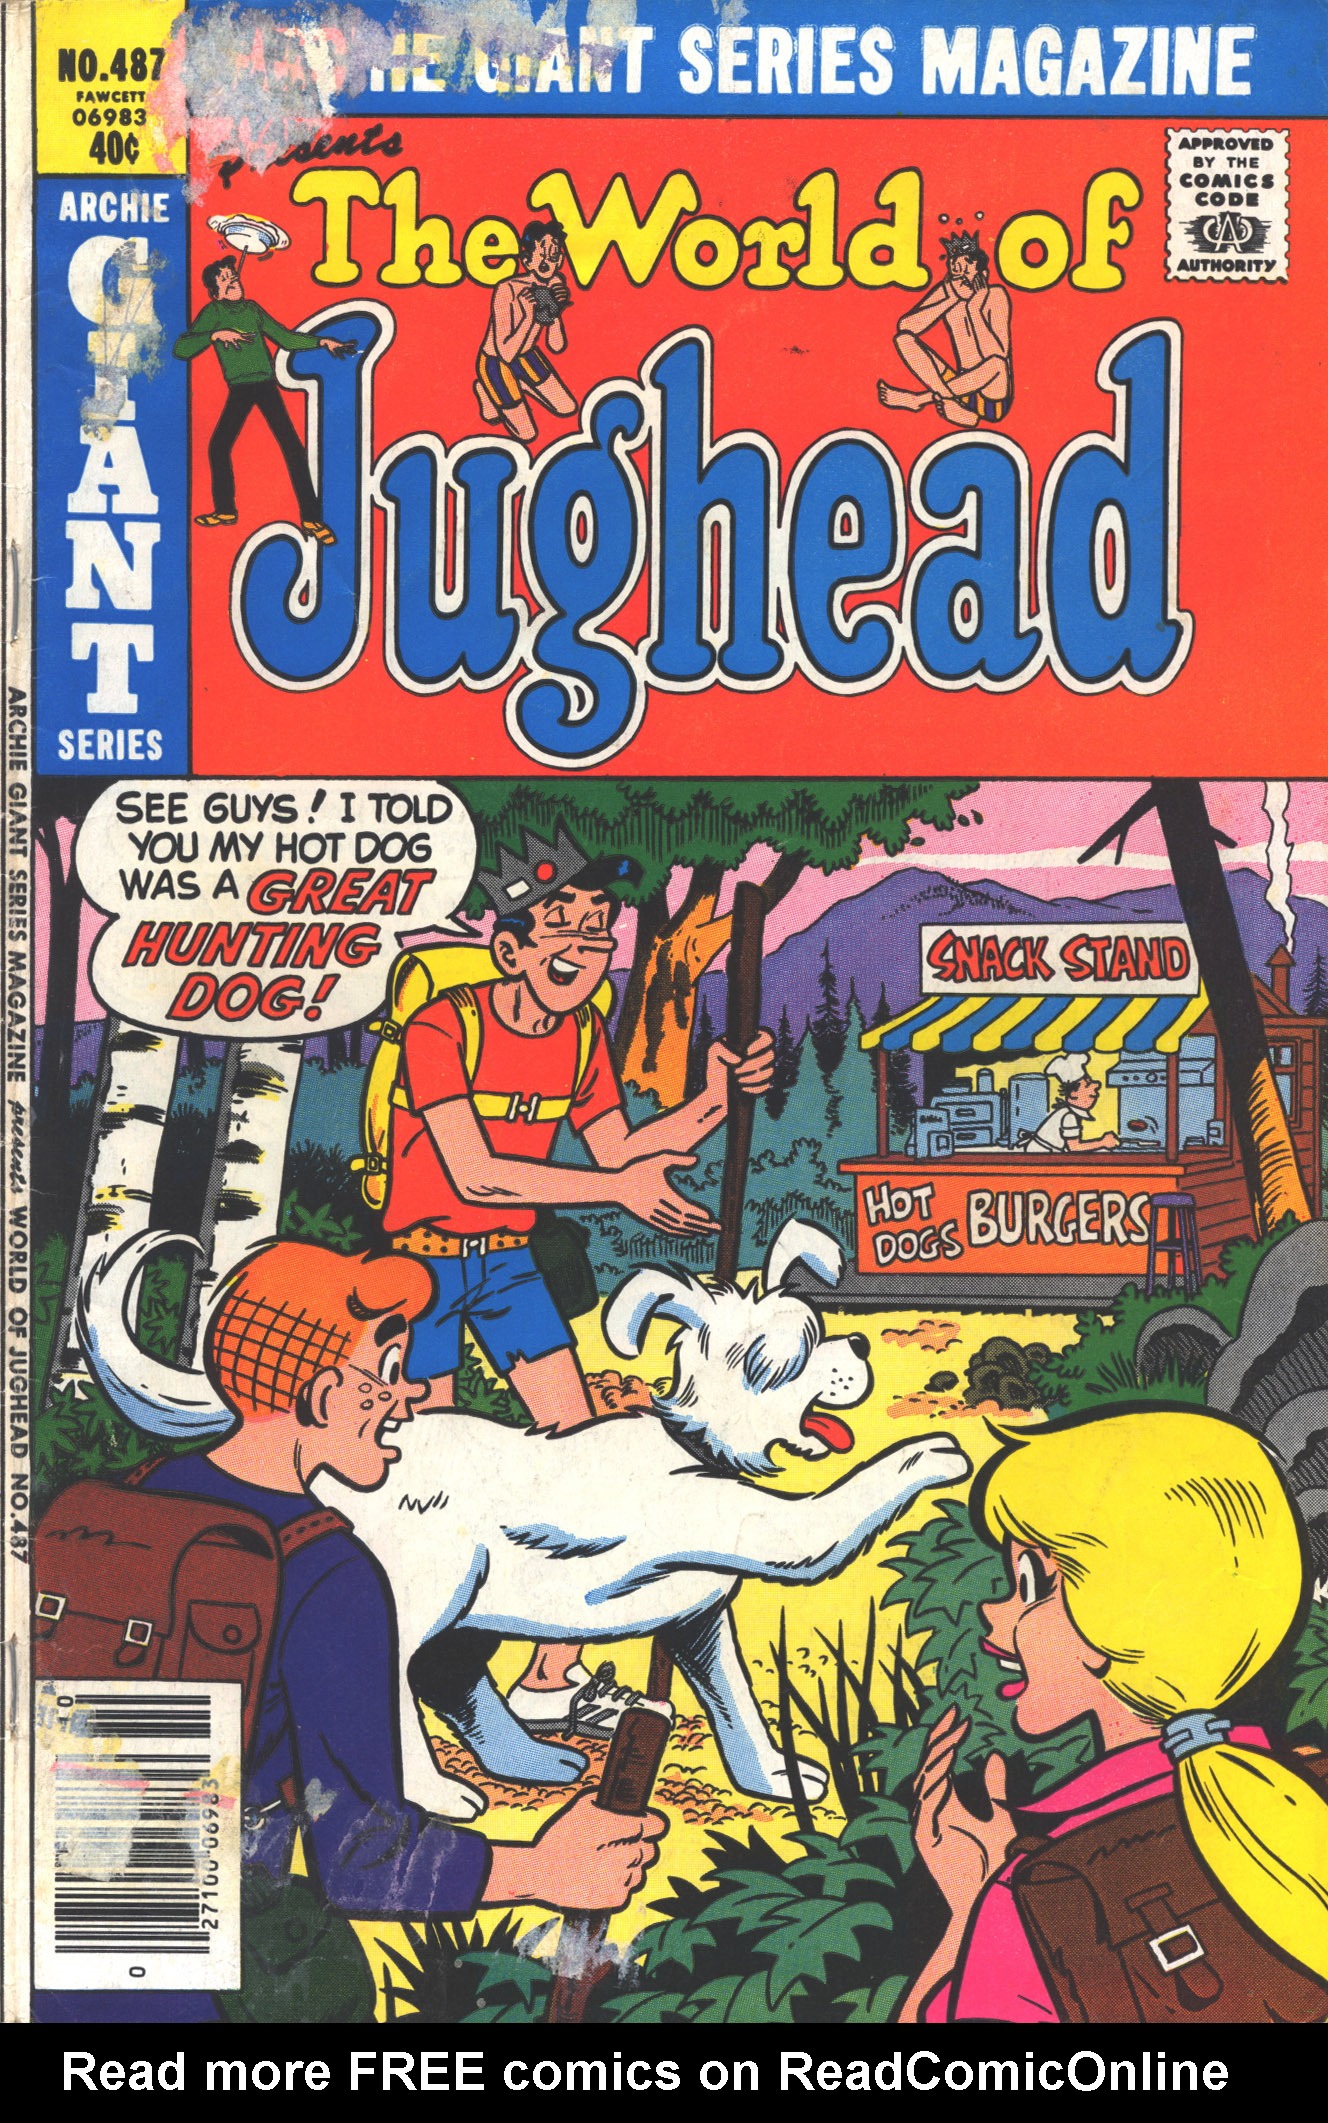 Read online Archie Giant Series Magazine comic -  Issue #487 - 1